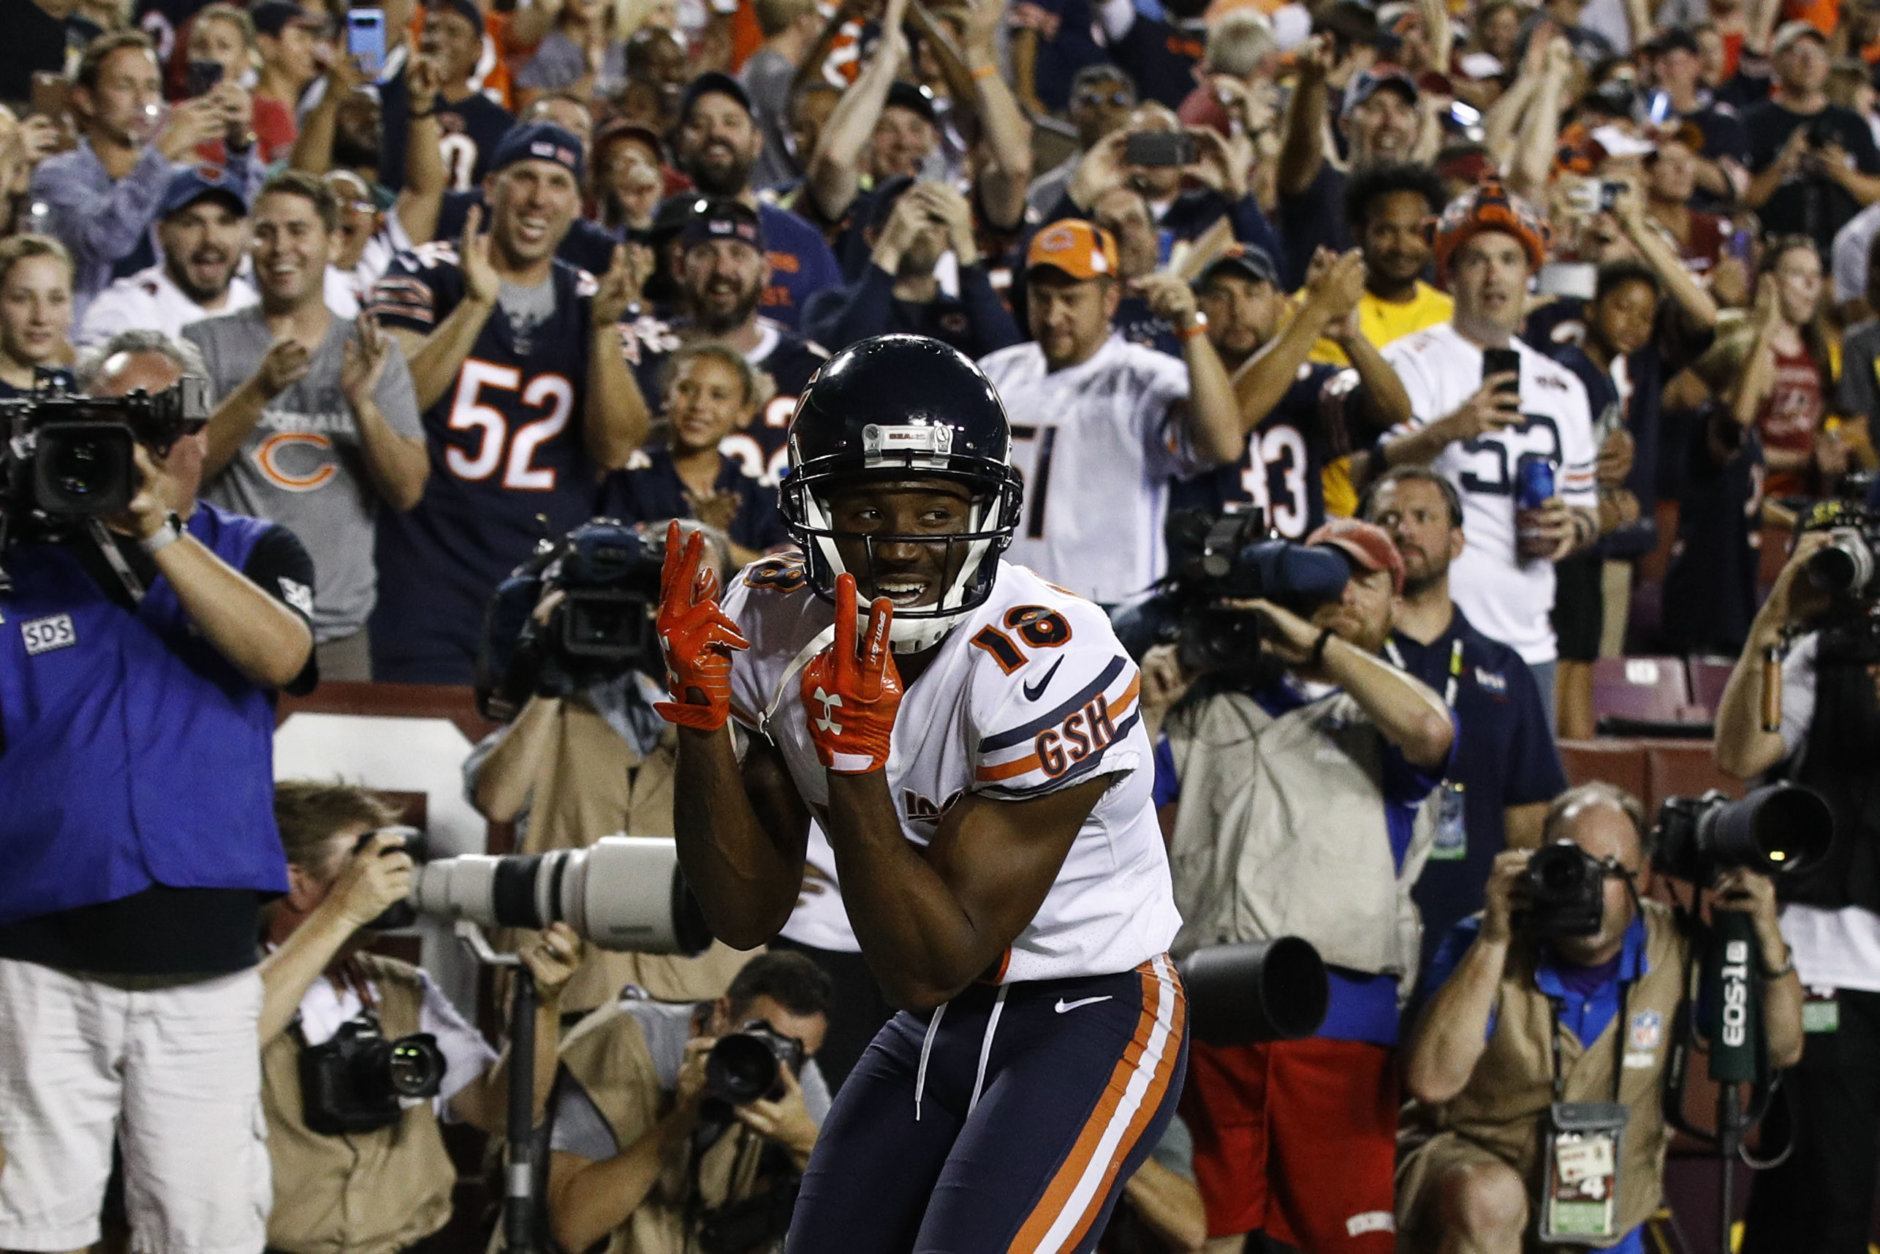 Chicago Bears wide receiver Taylor Gabriel (18) celebrates his touchdown pass during the first half of an NFL football game against the Washington Redskins, Monday, Sept. 23, 2019, in Landover, Md. (AP Photo/Patrick Semansky)